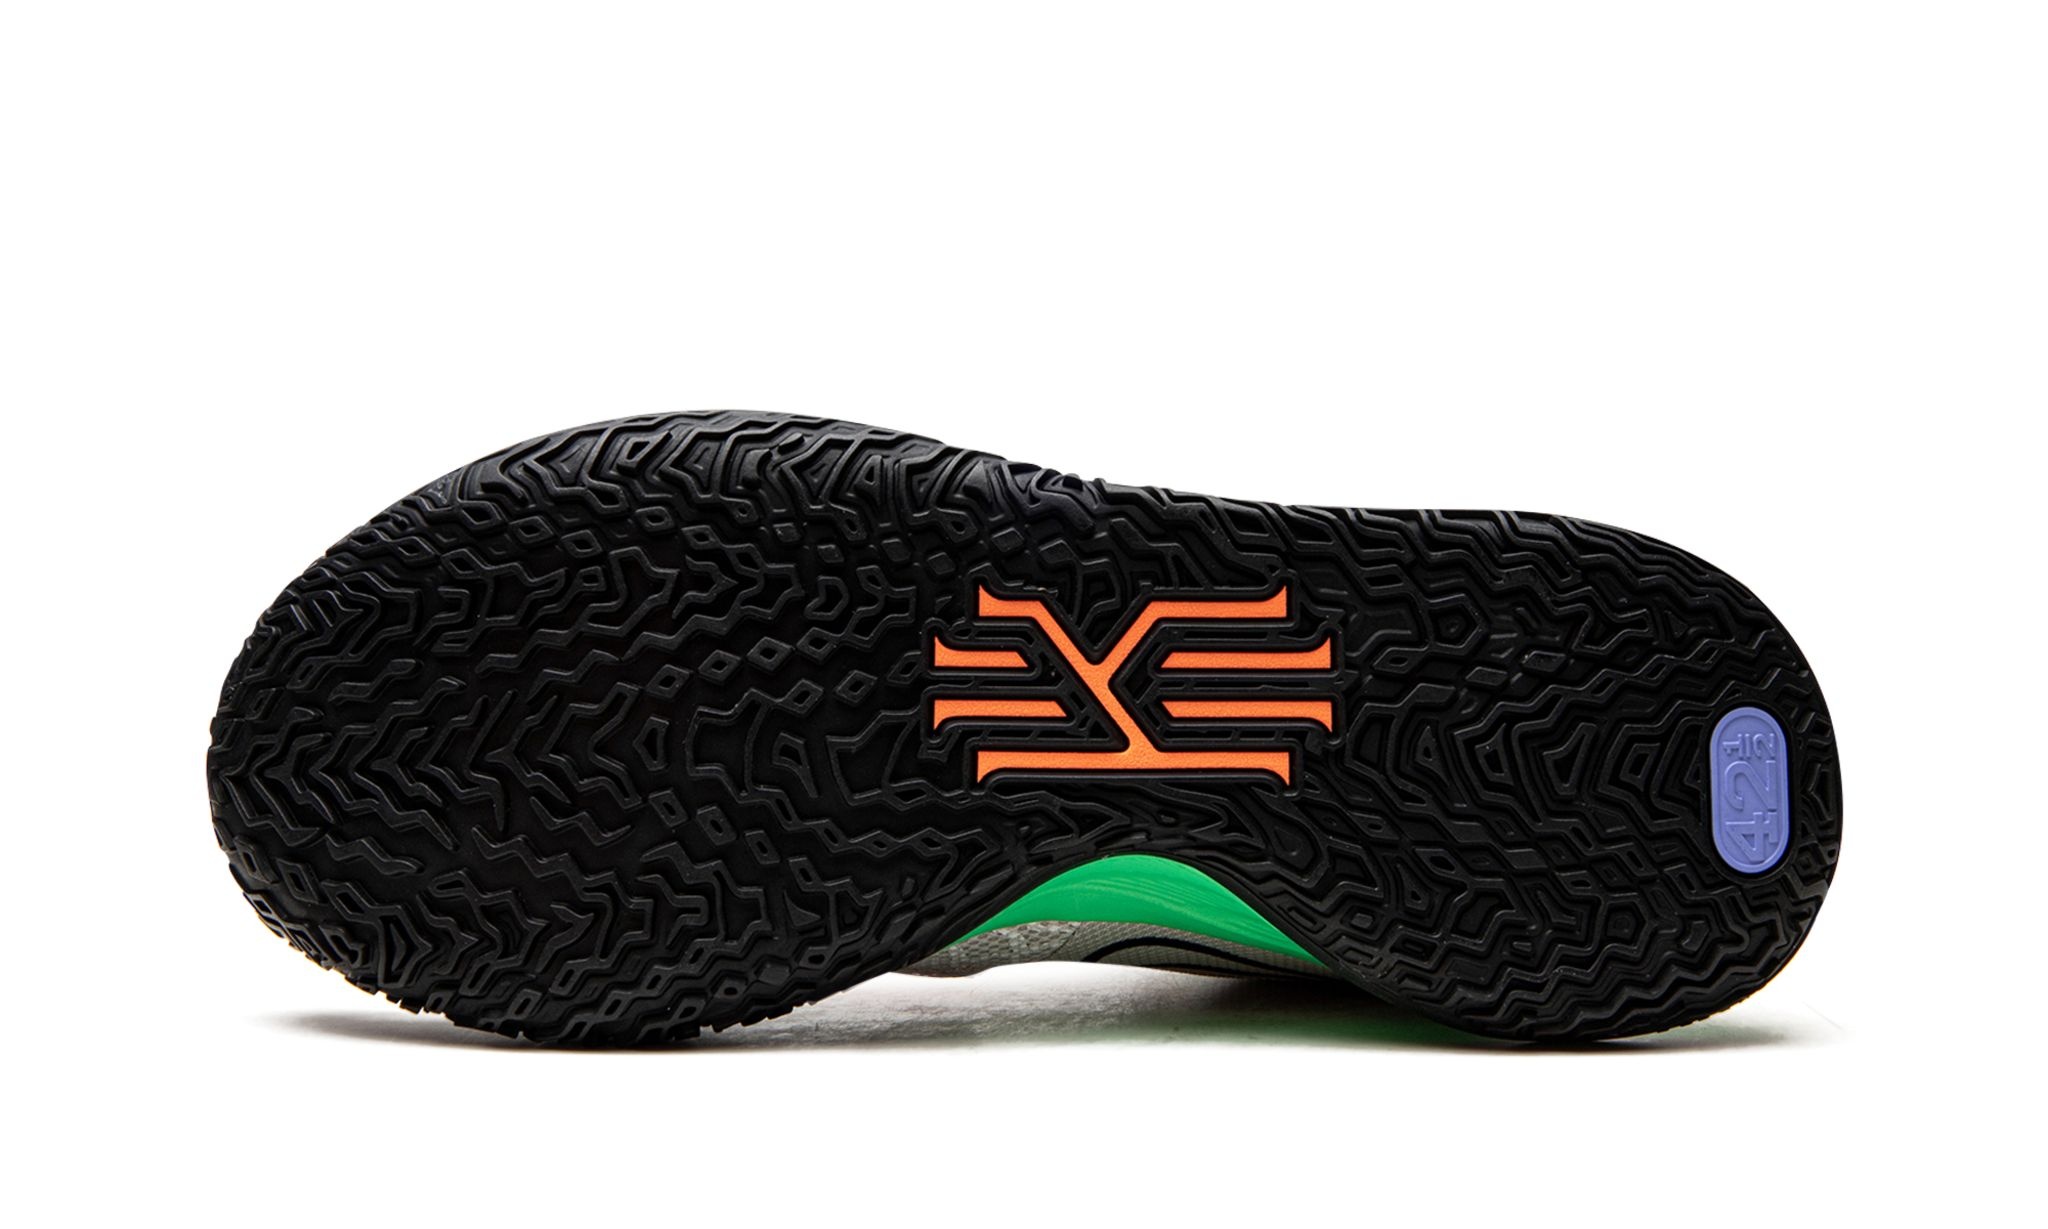 Kyrie 7 "Visions" - 5